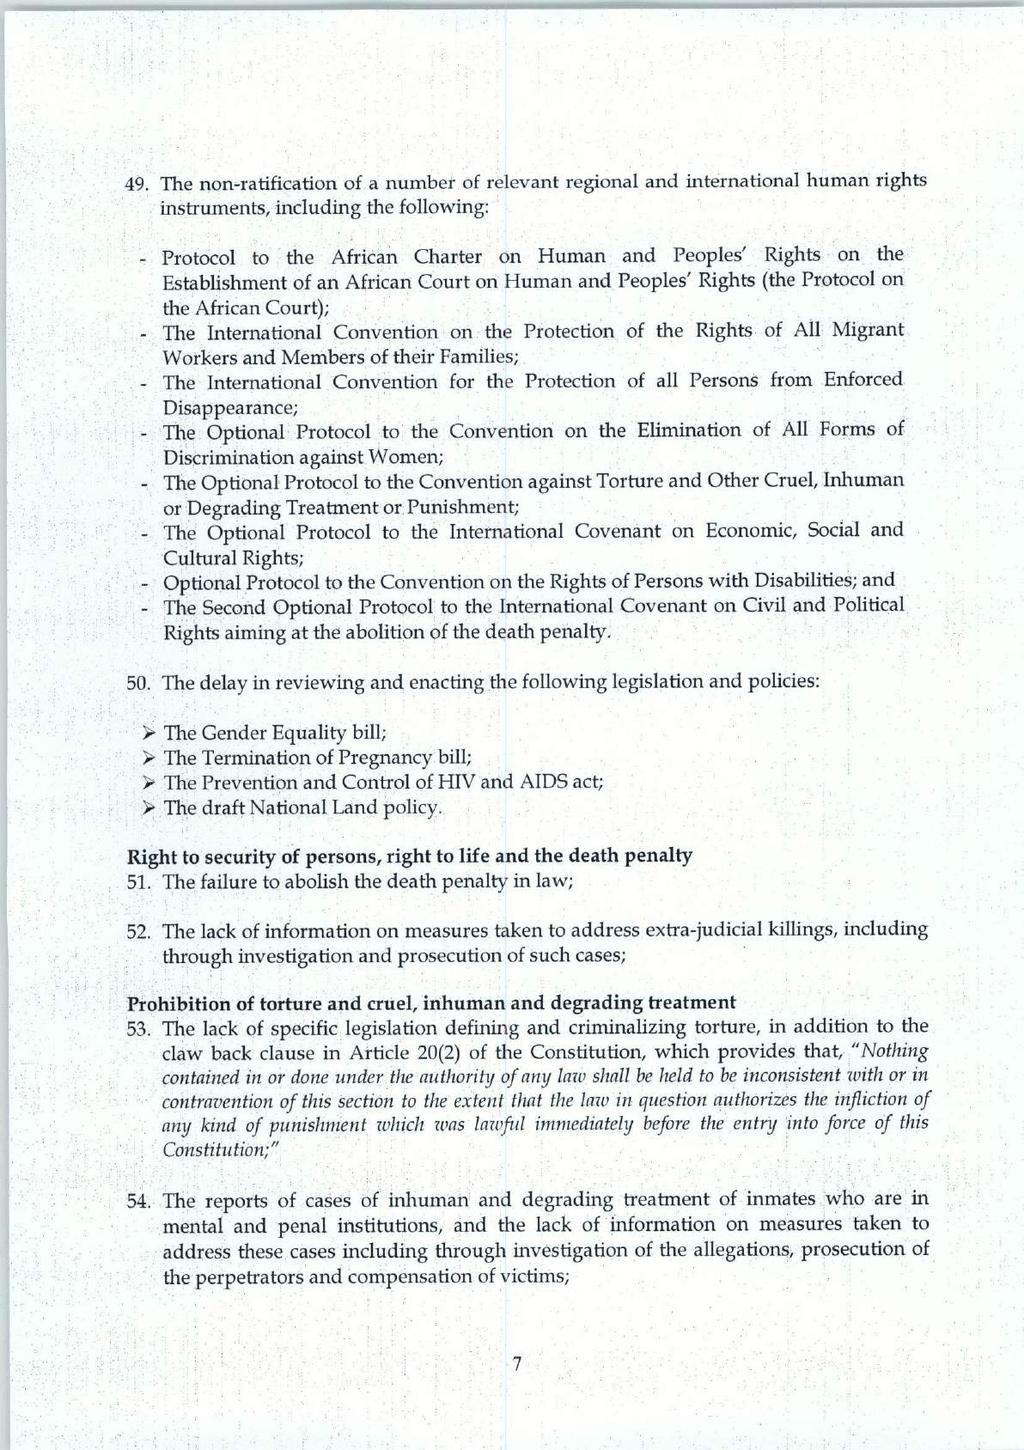 49. The non-ratification of a number of relevant regional and international human rights instruments, including the following: - Protocol to the African Charter on Human and Peoples' Rights on the